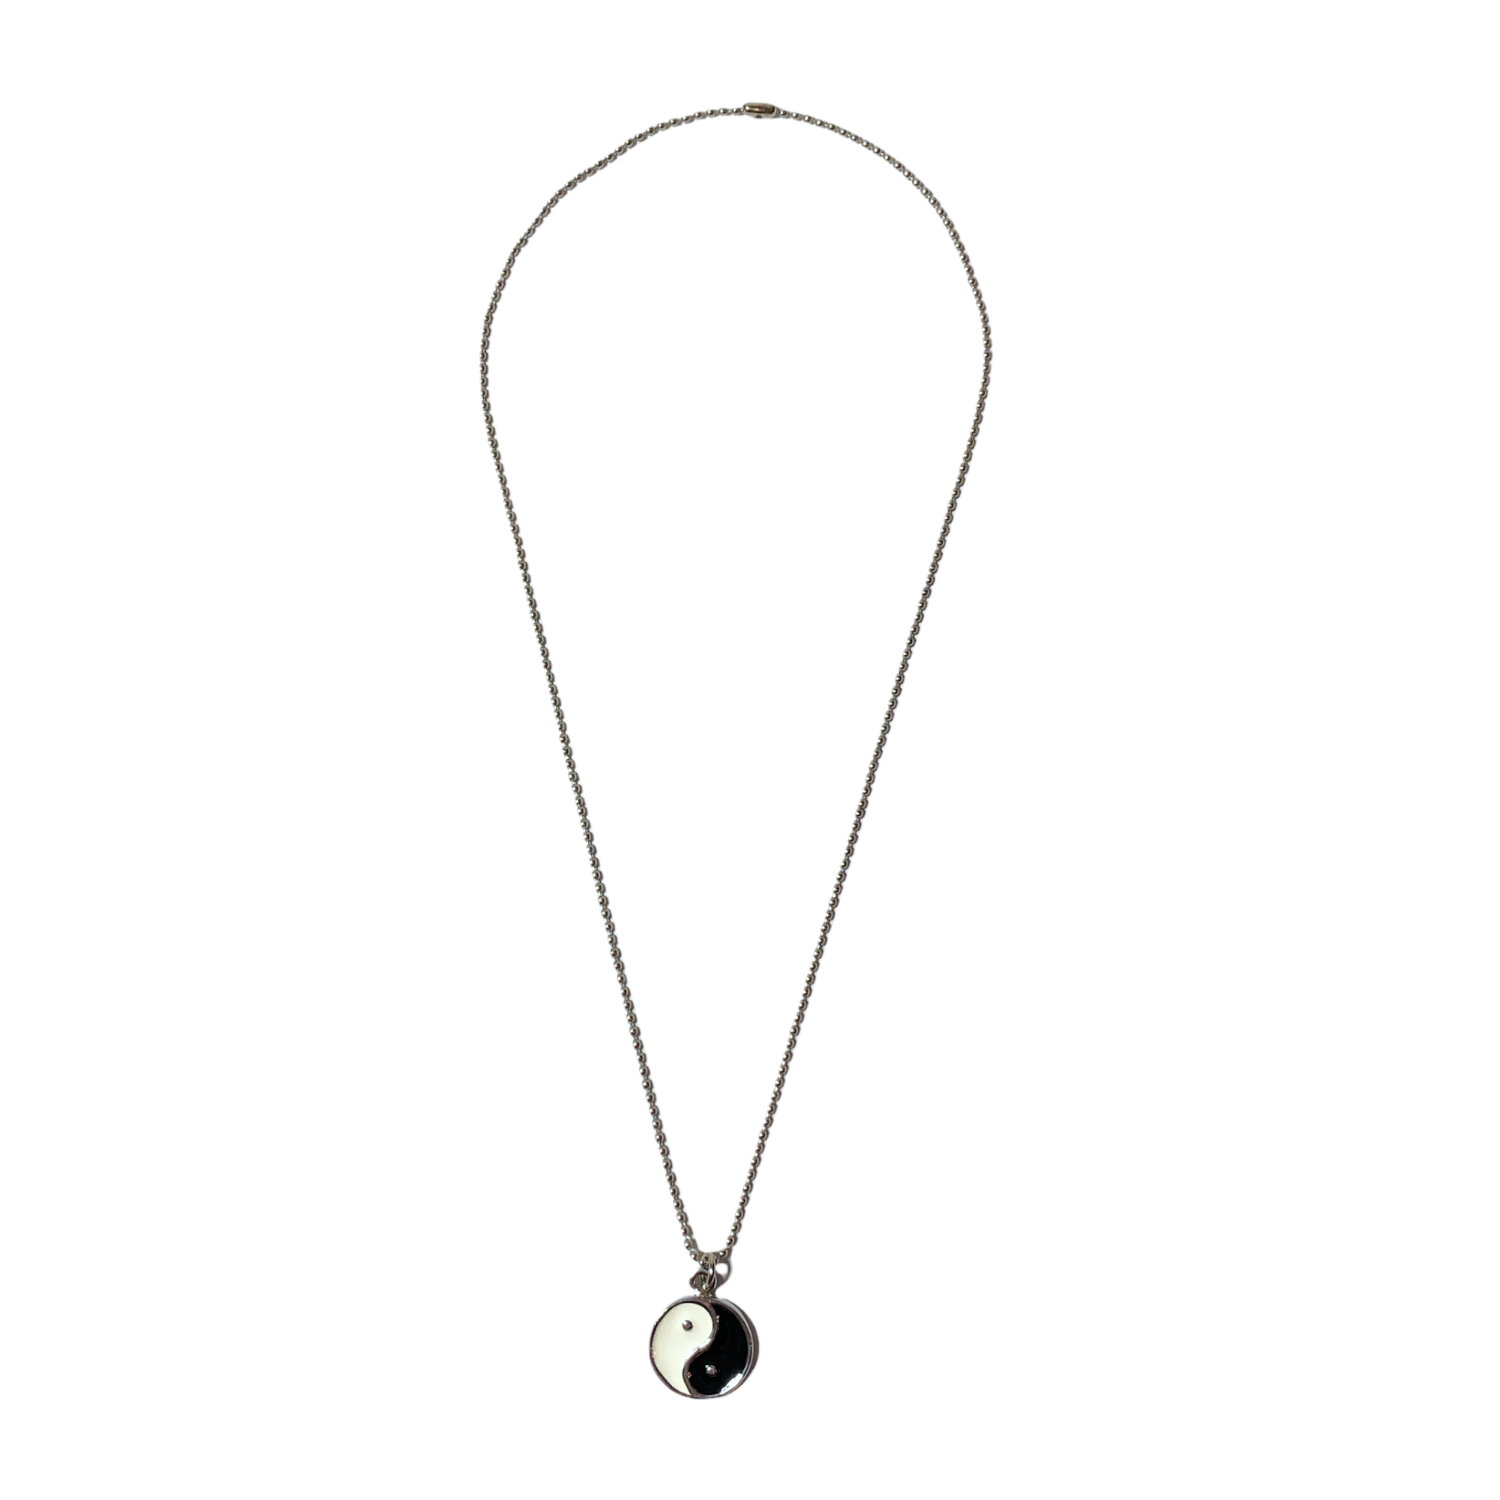 Necklace (Small Yinyang)